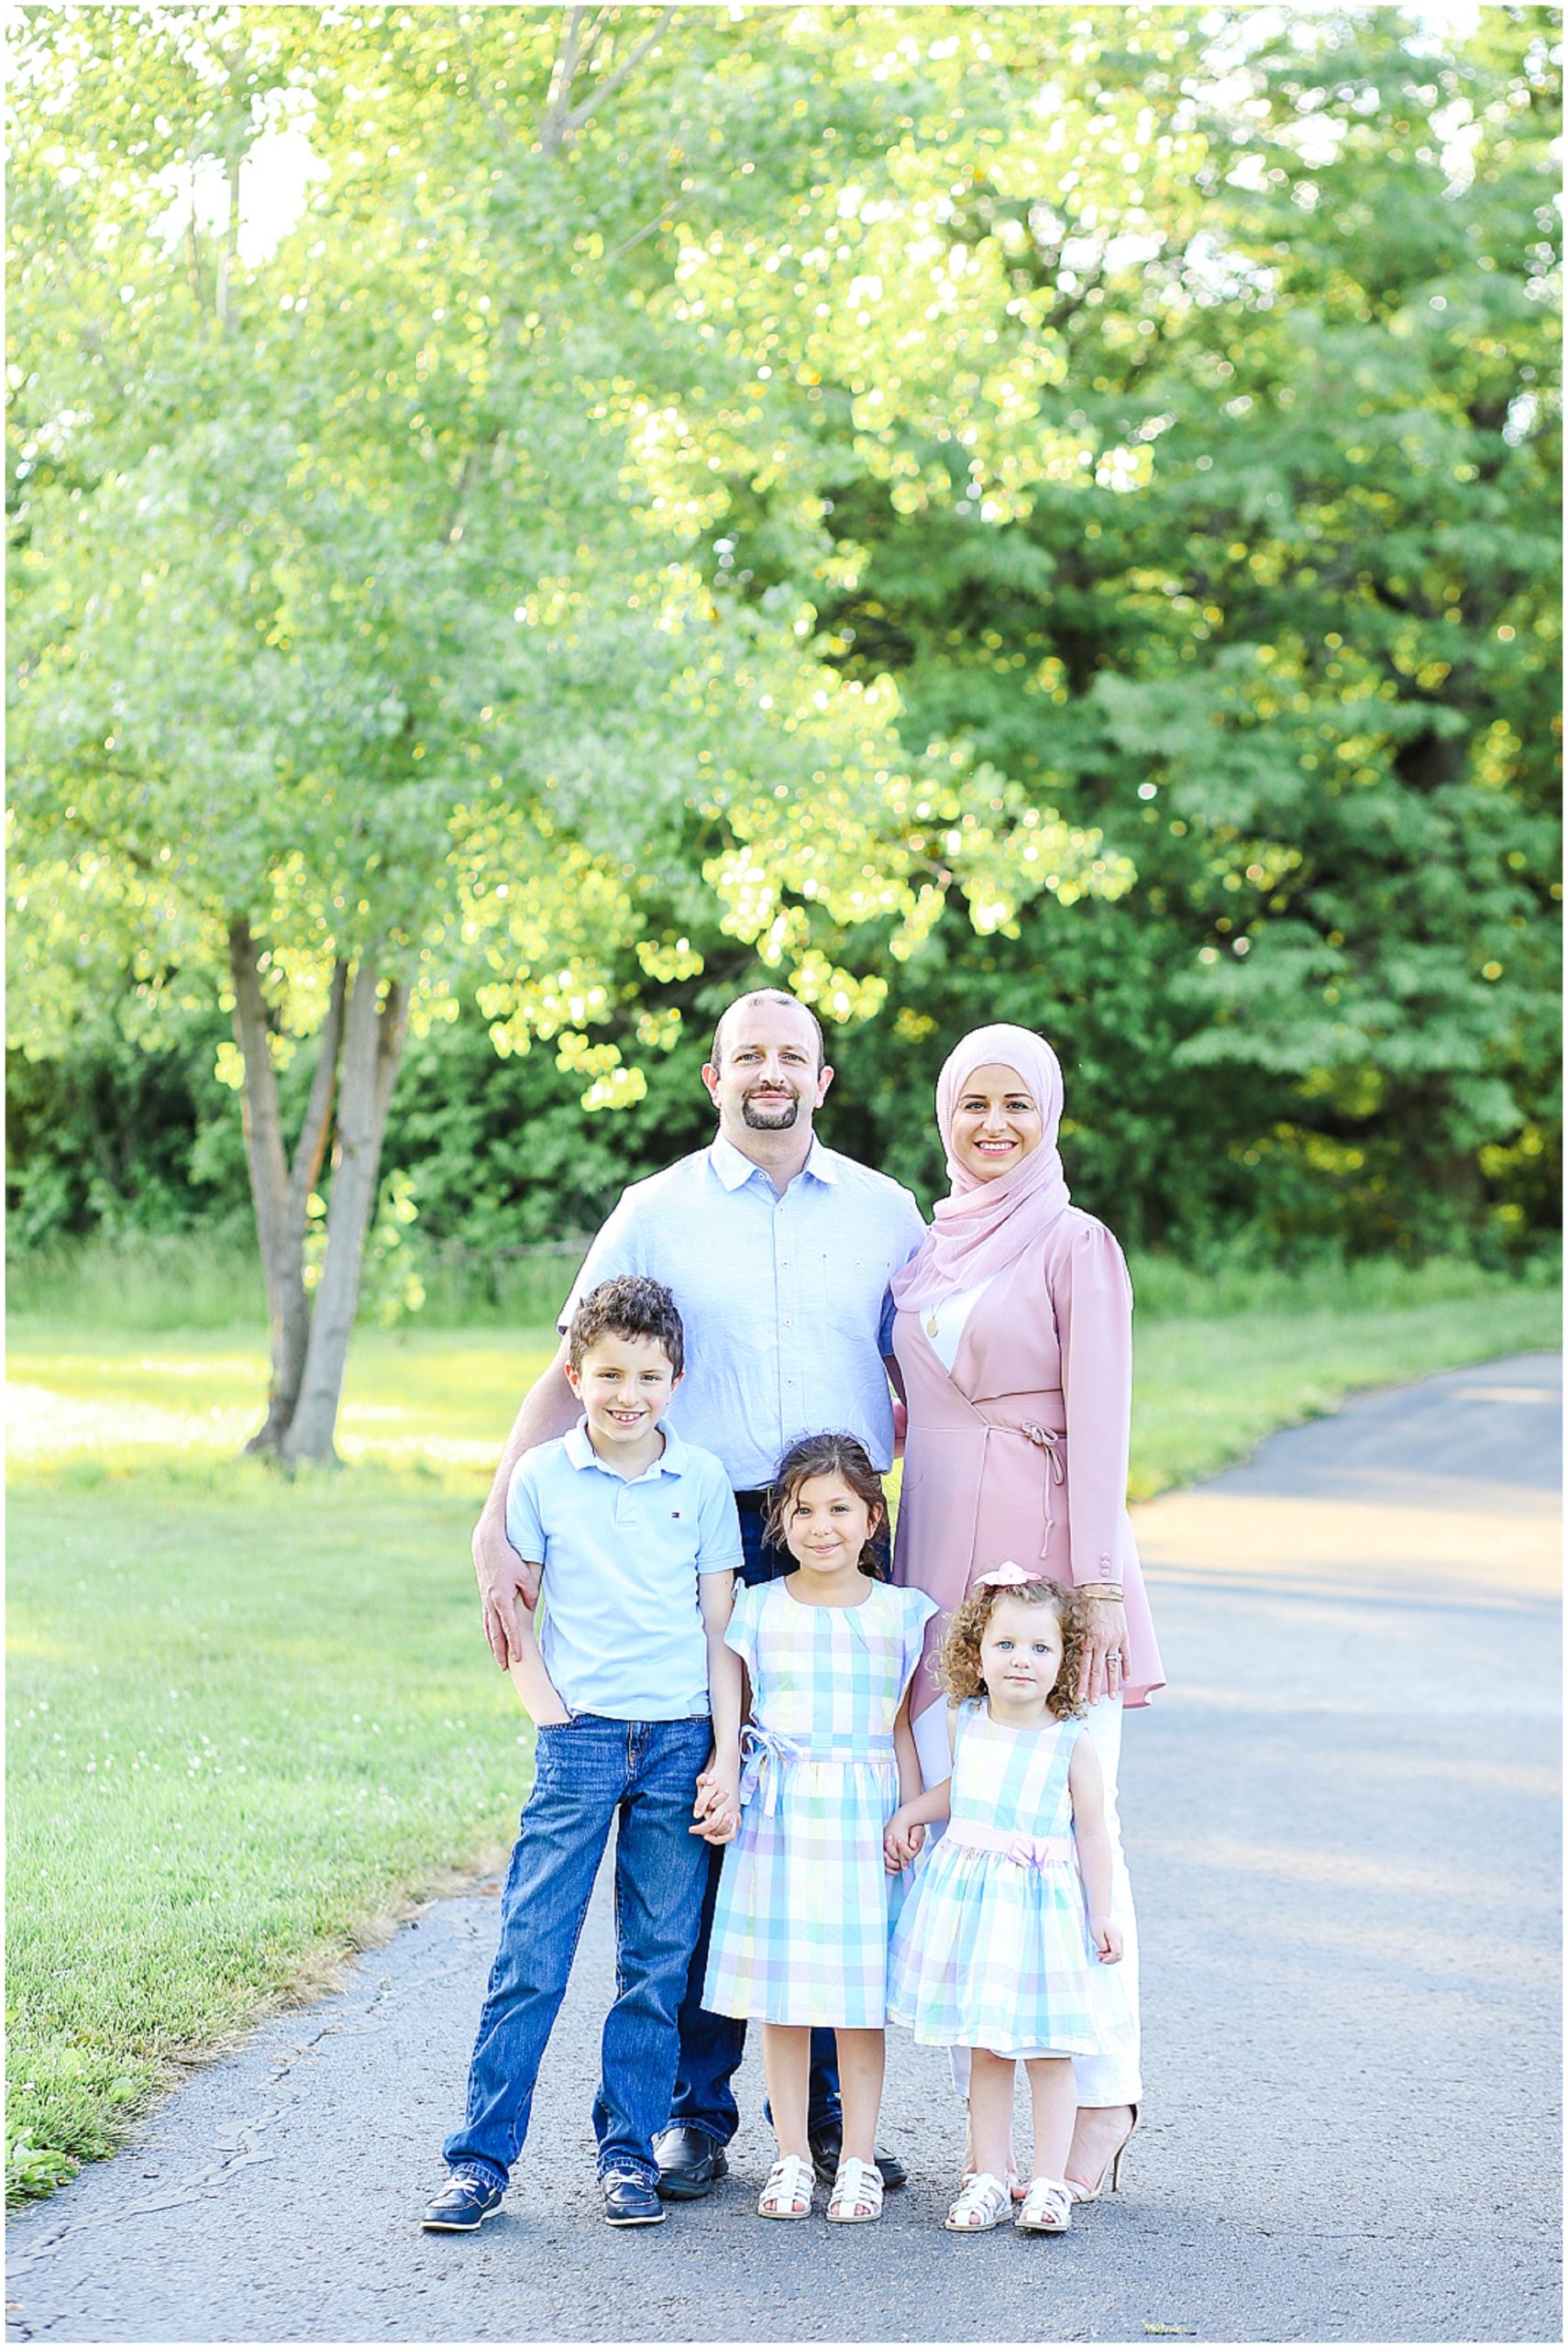 beautiful family portraits - arab muslim family photos outside at thomas stoll park in overland park - kc family photographer 